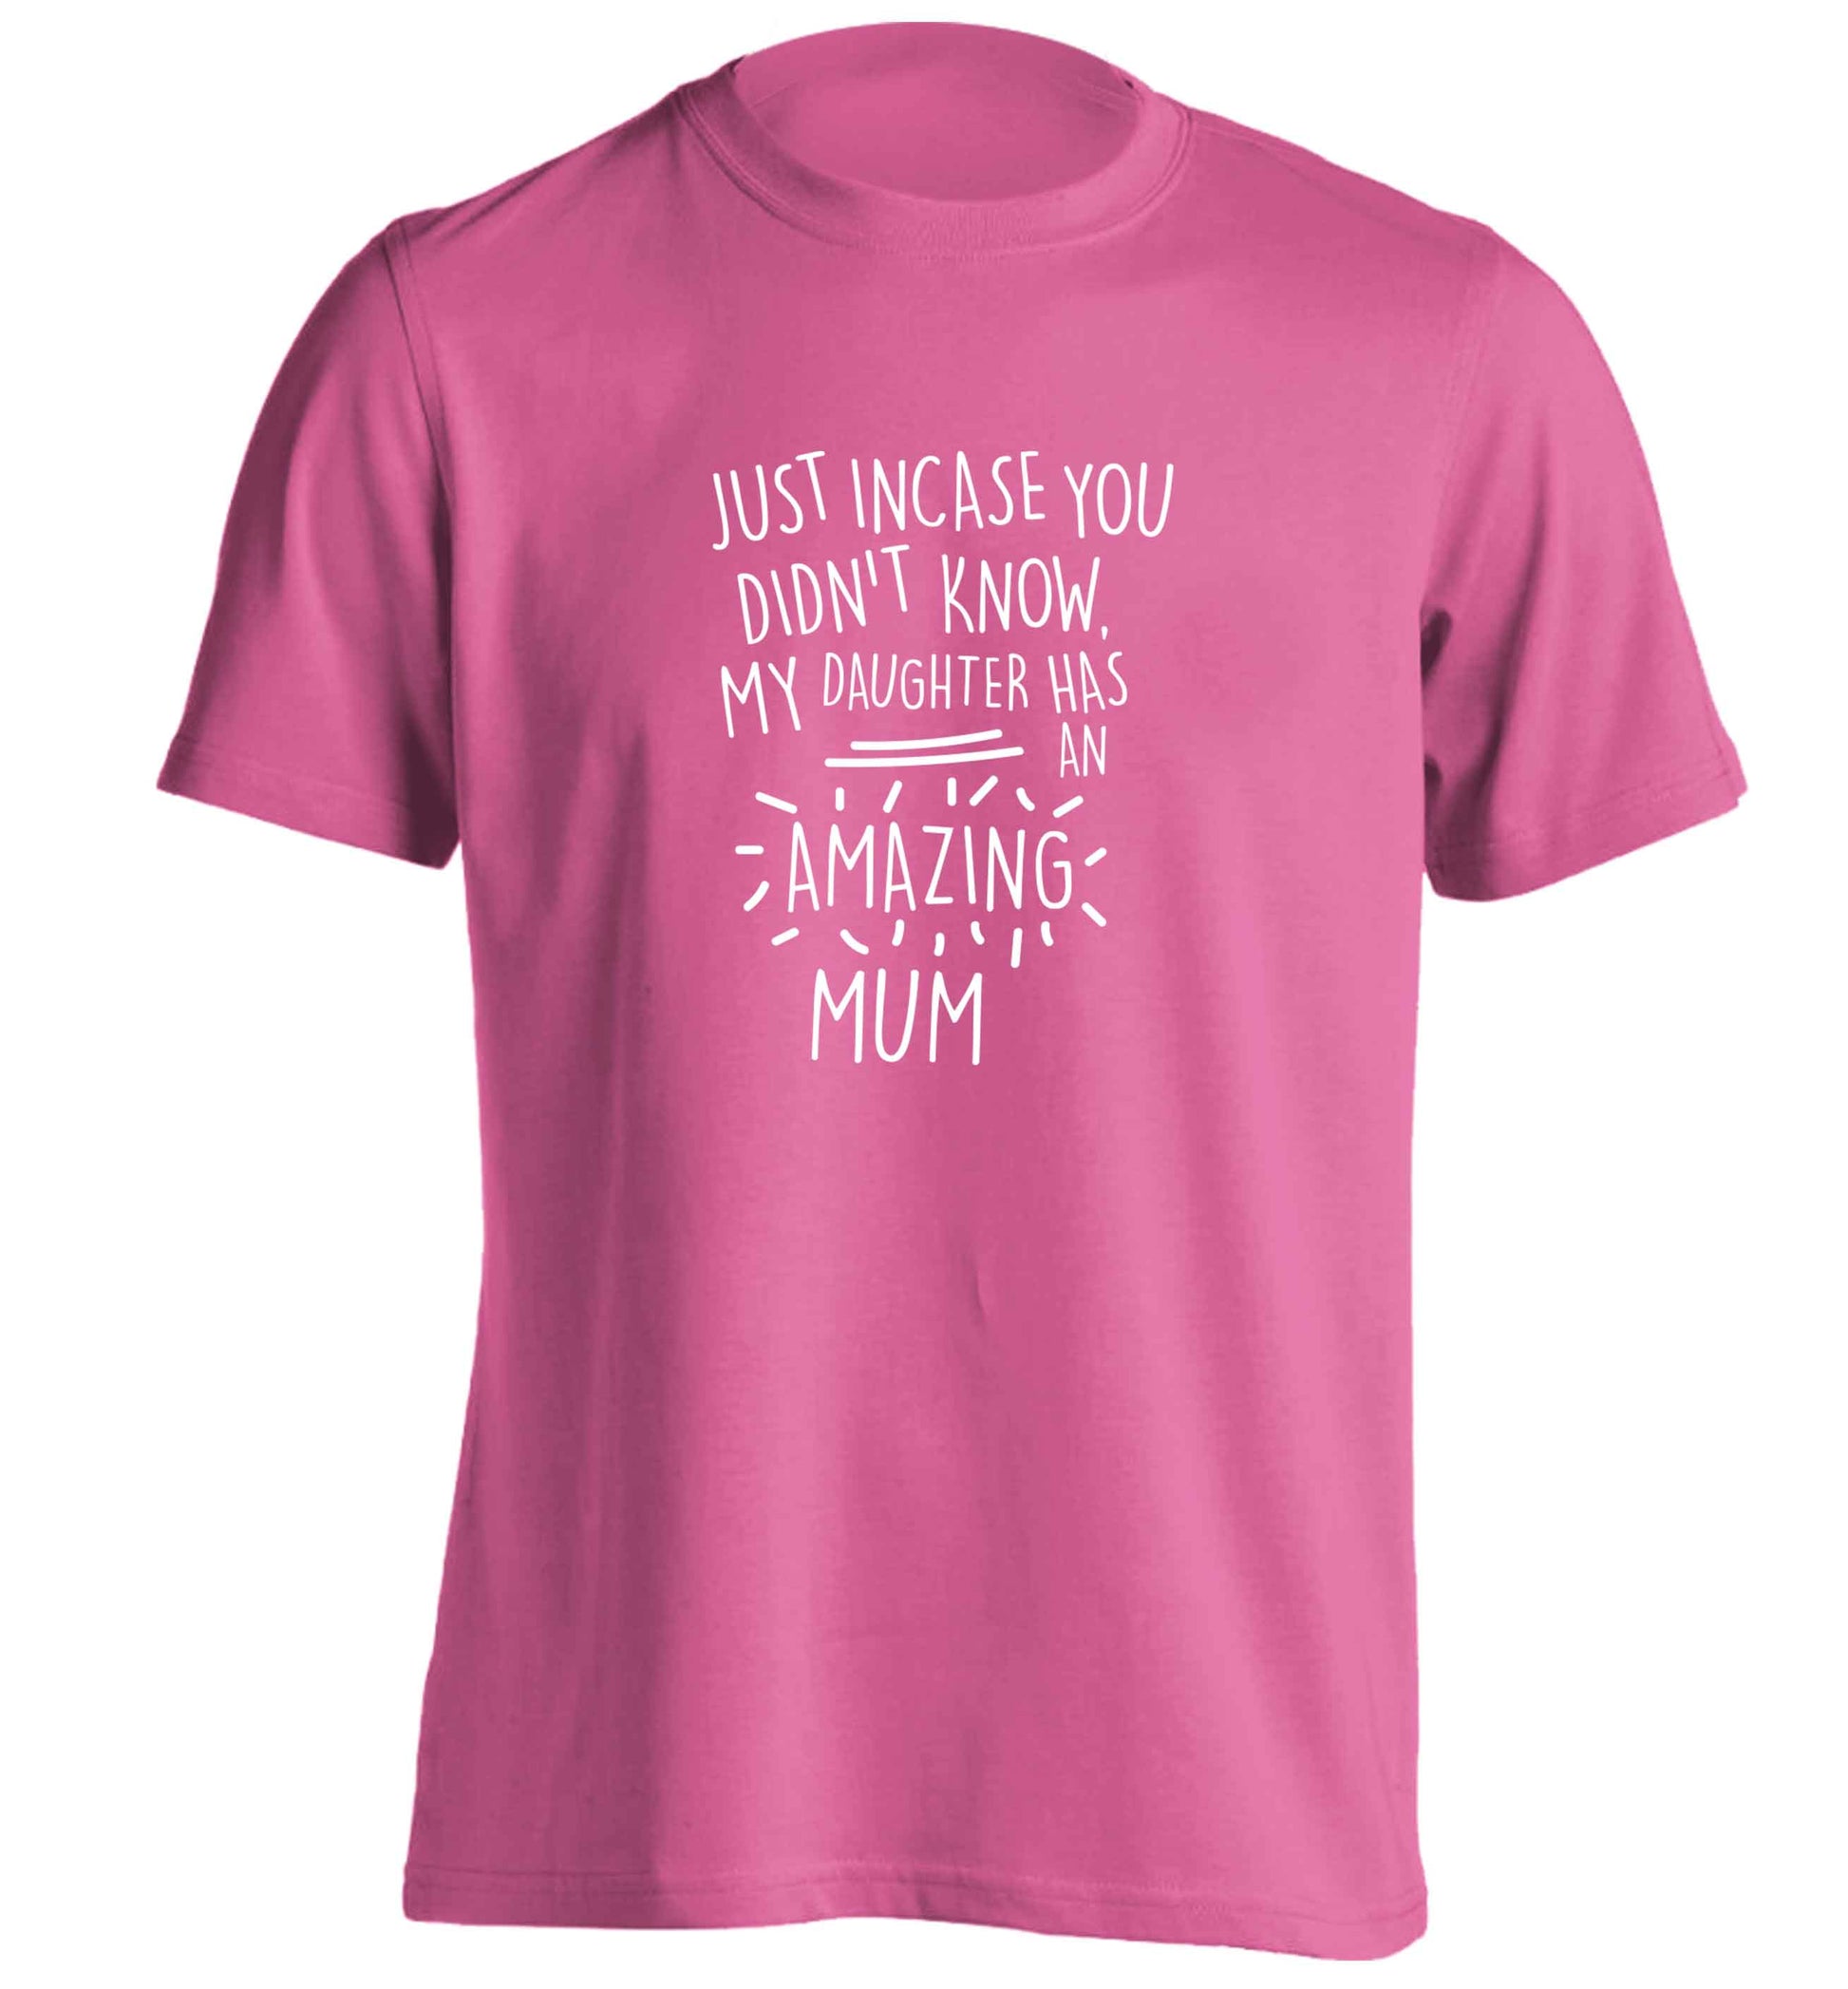 Just incase you didn't know my daughter has an amazing mum adults unisex pink Tshirt 2XL